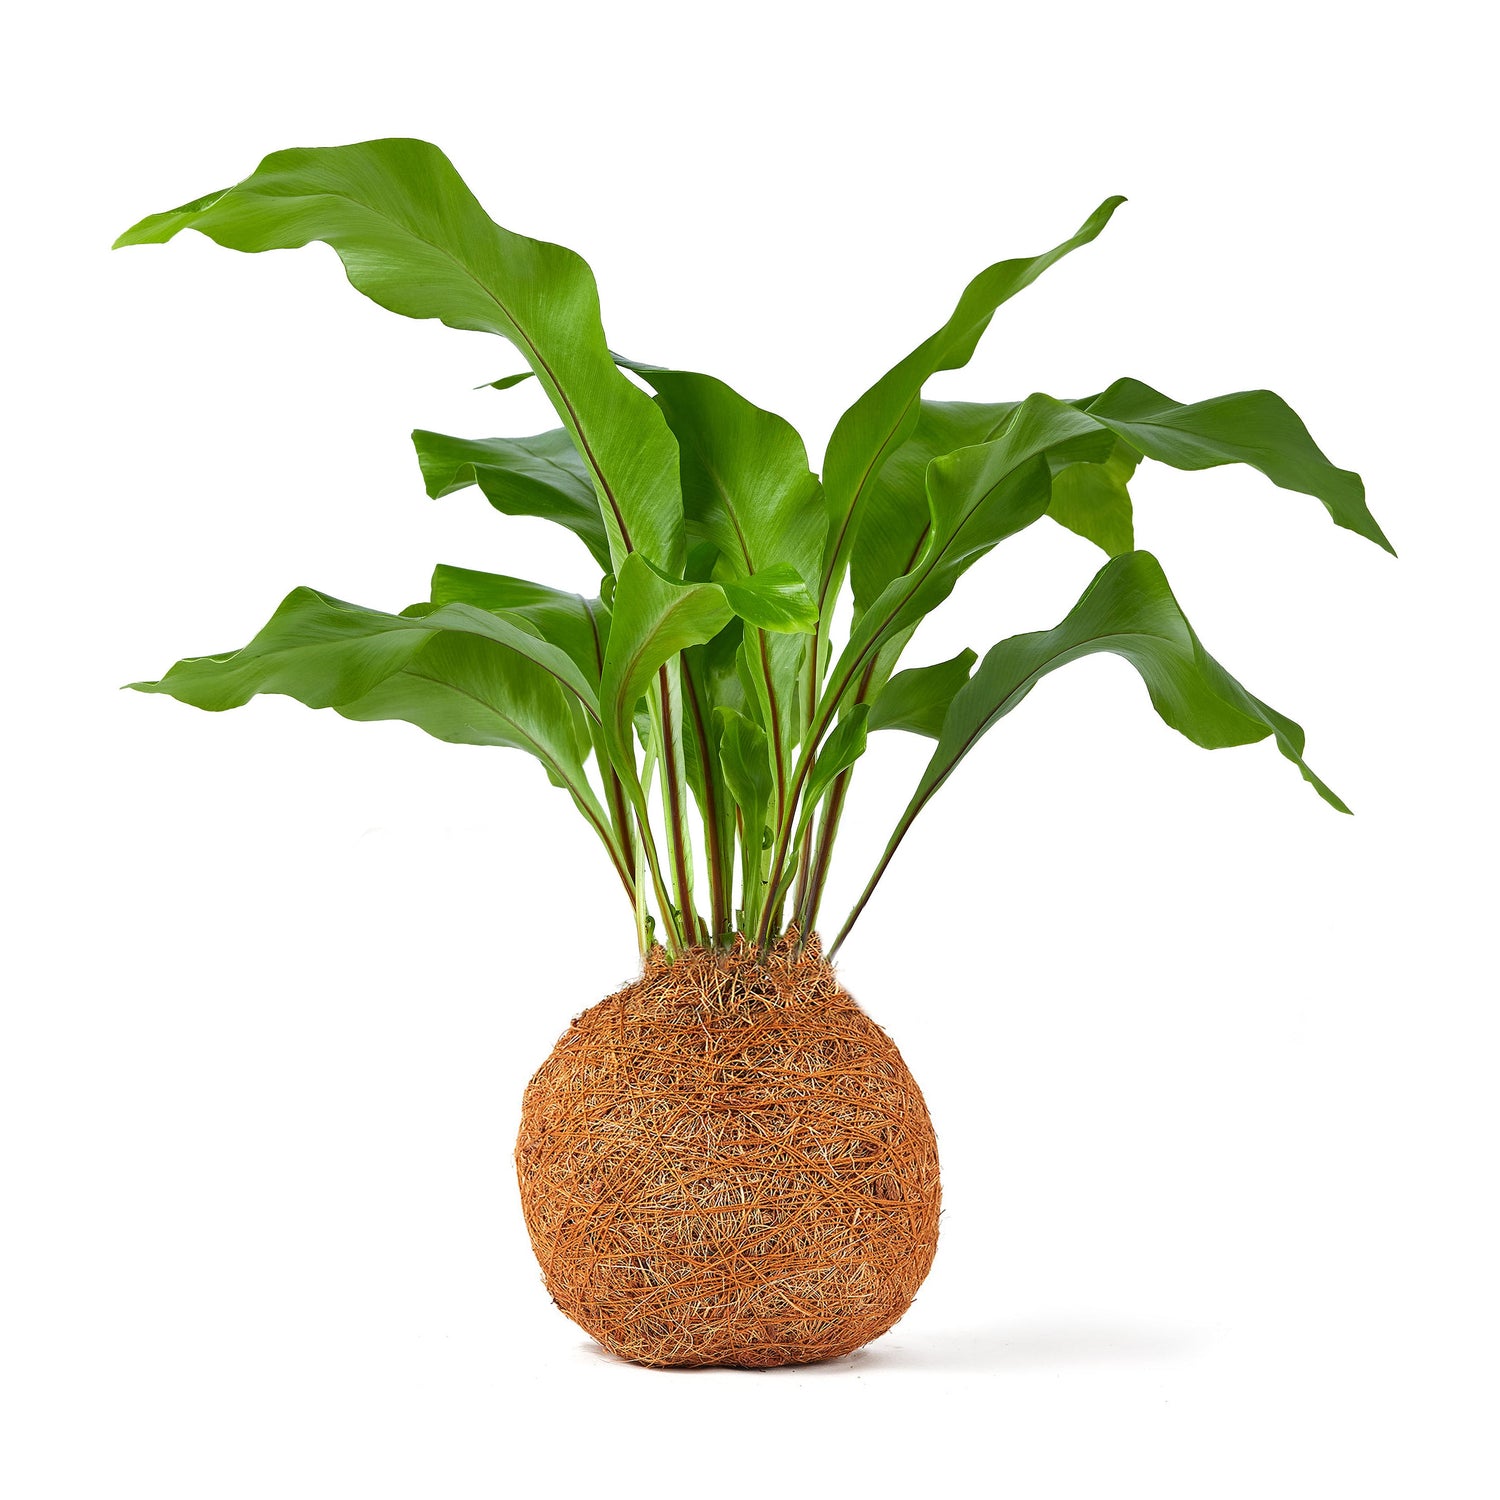 Corporate gift 20 pack - birds nest coco fibre fern kokedama with tray and wooden logo £25.99 each Tranquil Plants